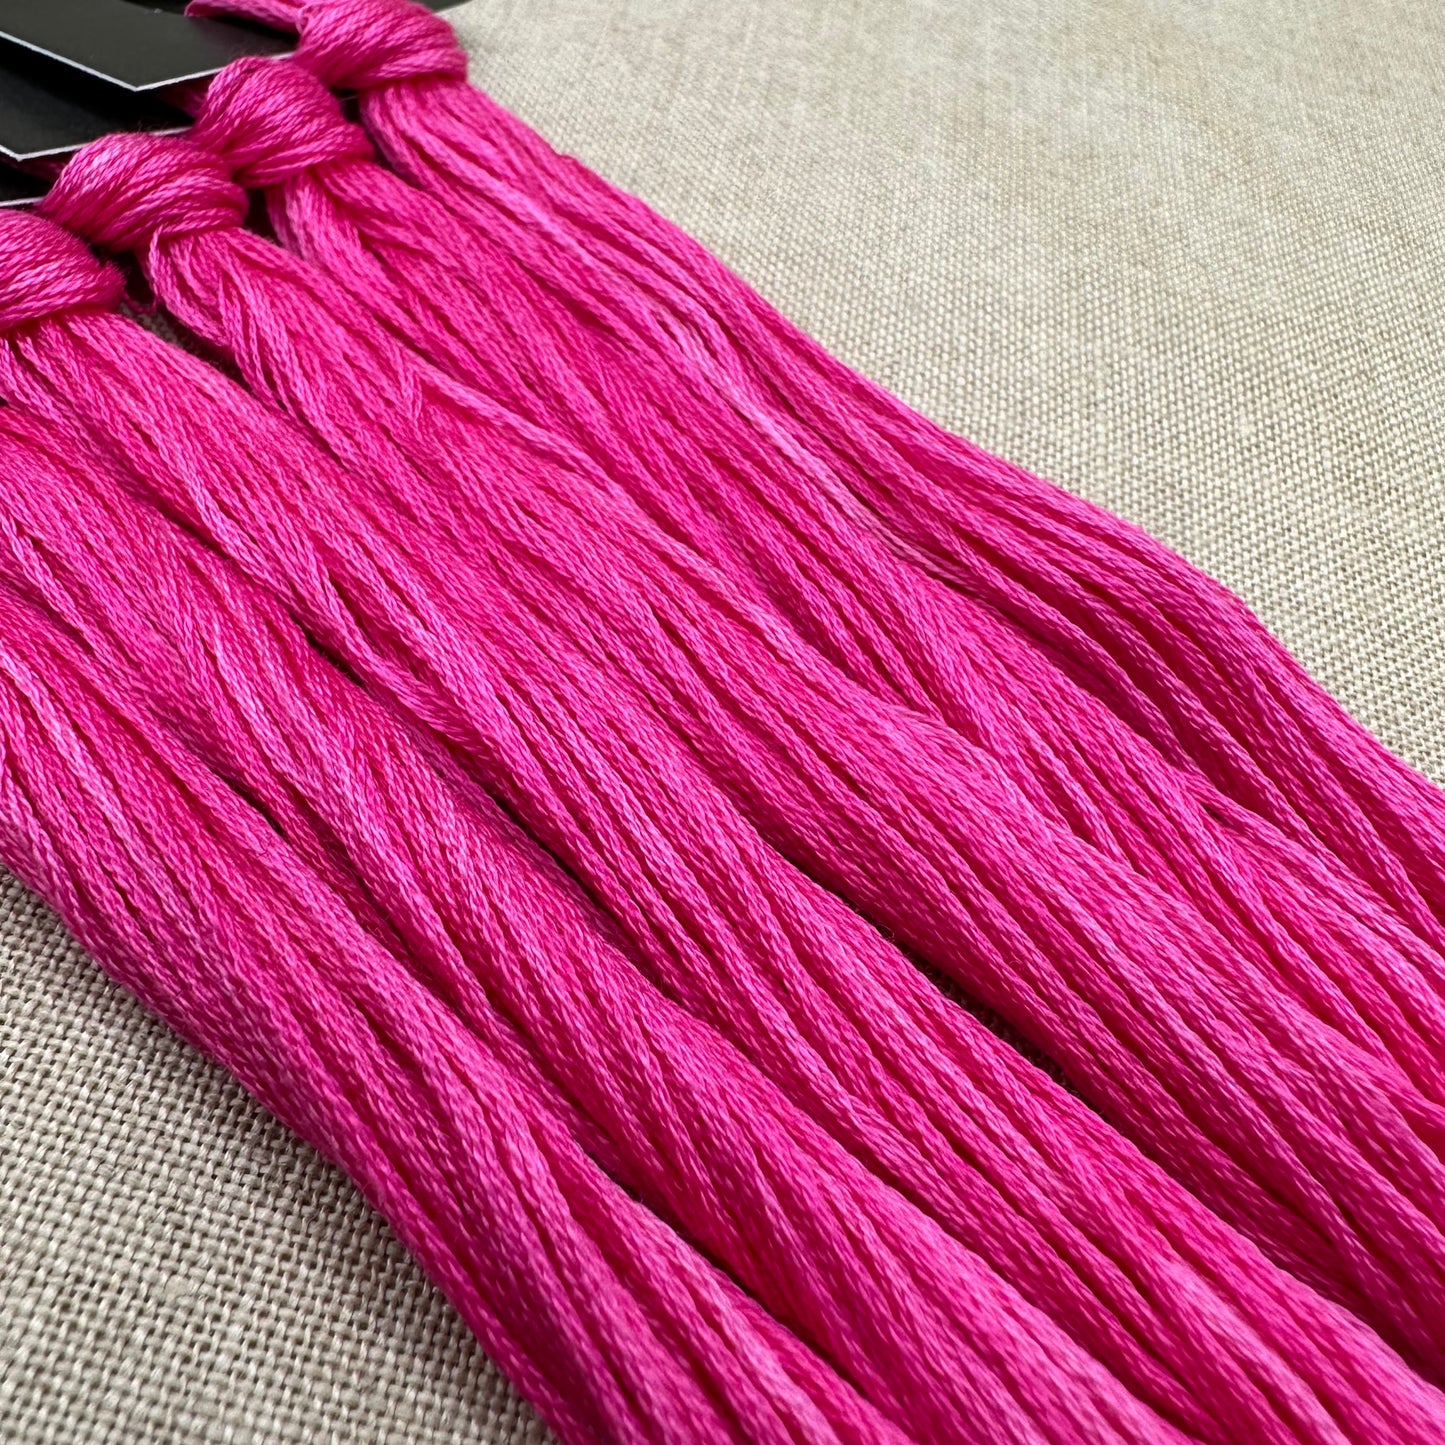 Roxy Floss Collection 8yd Wham Bam!